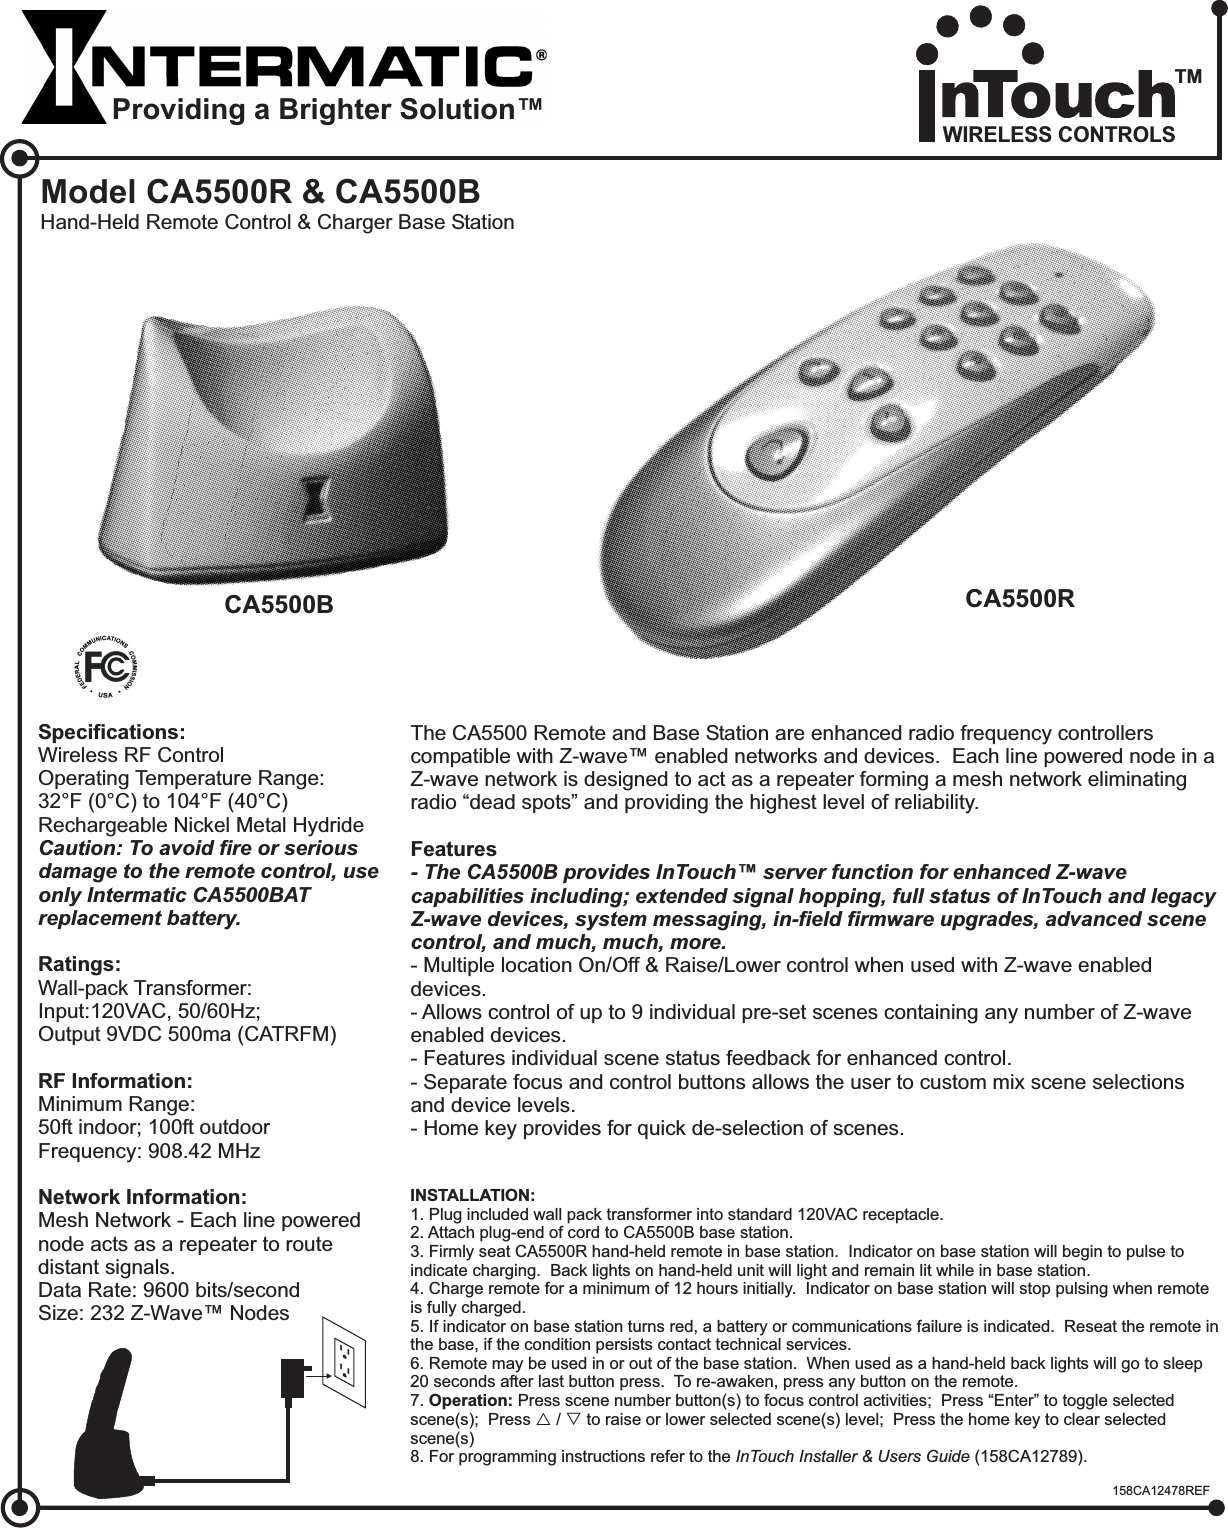 Model CA5500R &amp; CA5500BHand-Held Remote Control &amp; Charger Base StationSpecifications:Ratings:RF Information:Network Information:Wireless RF ControlWall-pack Transformer:Input:120VAC, 50/60Hz;Output 9VDC 500ma (CATRFM)Minimum Range:50ft indoor; 100ft outdoorFrequency: 908.42 MHzMesh Network - Each line powerednode acts as a repeater to routedistant signals.Data Rate: 9600 bits/secondSize: 232 Z-Wave™ NodesOperating Temperature Range:32°F (0°C) to 104°F (40°C)Rechargeable Nickel Metal HydrideCaution: To avoid fire or seriousdamage to the remote control, useonly Intermatic CA5500BATreplacement battery.INSTALLATION:1. Plug included wall pack transformer into standard 120VAC receptacle.2. Attach plug-end of cord to CA5500B base station.3. Firmly seat CA5500R hand-held remote in base station. Indicator on base station will begin to pulse toindicate charging. Back lights on hand-held unit will light and remain lit while in base station.4. Charge remote for a minimum of 12 hours initially. Indicator on base station will stop pulsing when remoteis fully charged.5. If indicator on base station turns red, a battery or communications failure is indicated. Reseat the remote inthe base, if the condition persists contact technical services.6. Remote may be used in or out of the base station. When used as a hand-held back lights will go to sleep20 seconds after last button press. To re-awaken, press any button on the remote.7.8. For programming instructions refer to theOperation: Press scene number button(s) to focus control activities; Press “Enter” to toggle selectedscene(s); Press(158CA12789).InTouch Installer &amp; Users Guiders/ to raise or lower selected scene(s) level; Press the home key to clear selectedscene(s)The CA5500 Remote and Base Station areEach line powered node in aZ-wave network is designed to act as a repeater forming a mesh network eliminatingradio “dead spots” and providing the highest level of reliability.- Multiple location On/Off &amp; Raise/Lower control when used with Z-wave enableddevices.- Allows control of up to 9 individual pre-set scenes containing any number of Z-waveenabled devices.- Features individual scene status feedback for enhanced control.- Separate focus and control buttons allows the user to custom mix scene selectionsand device levels.- Home key provides for quick de-selection of scenes.enhanced radio frequency controllerscompatible with Z-wave™ enabled networks and devices.Features- The CA5500B provides InTouch server function for enhanced Z-wavecapabilities including; extended signal hopping, full status of InTouch and legacyZ-wave devices, system messaging, in-field firmware upgrades, advanced scenecontrol, and much, much, more.™CA5500B CA5500RProviding a Brighter Solution™158CA12478REFWIRELESS CONTROLSTM